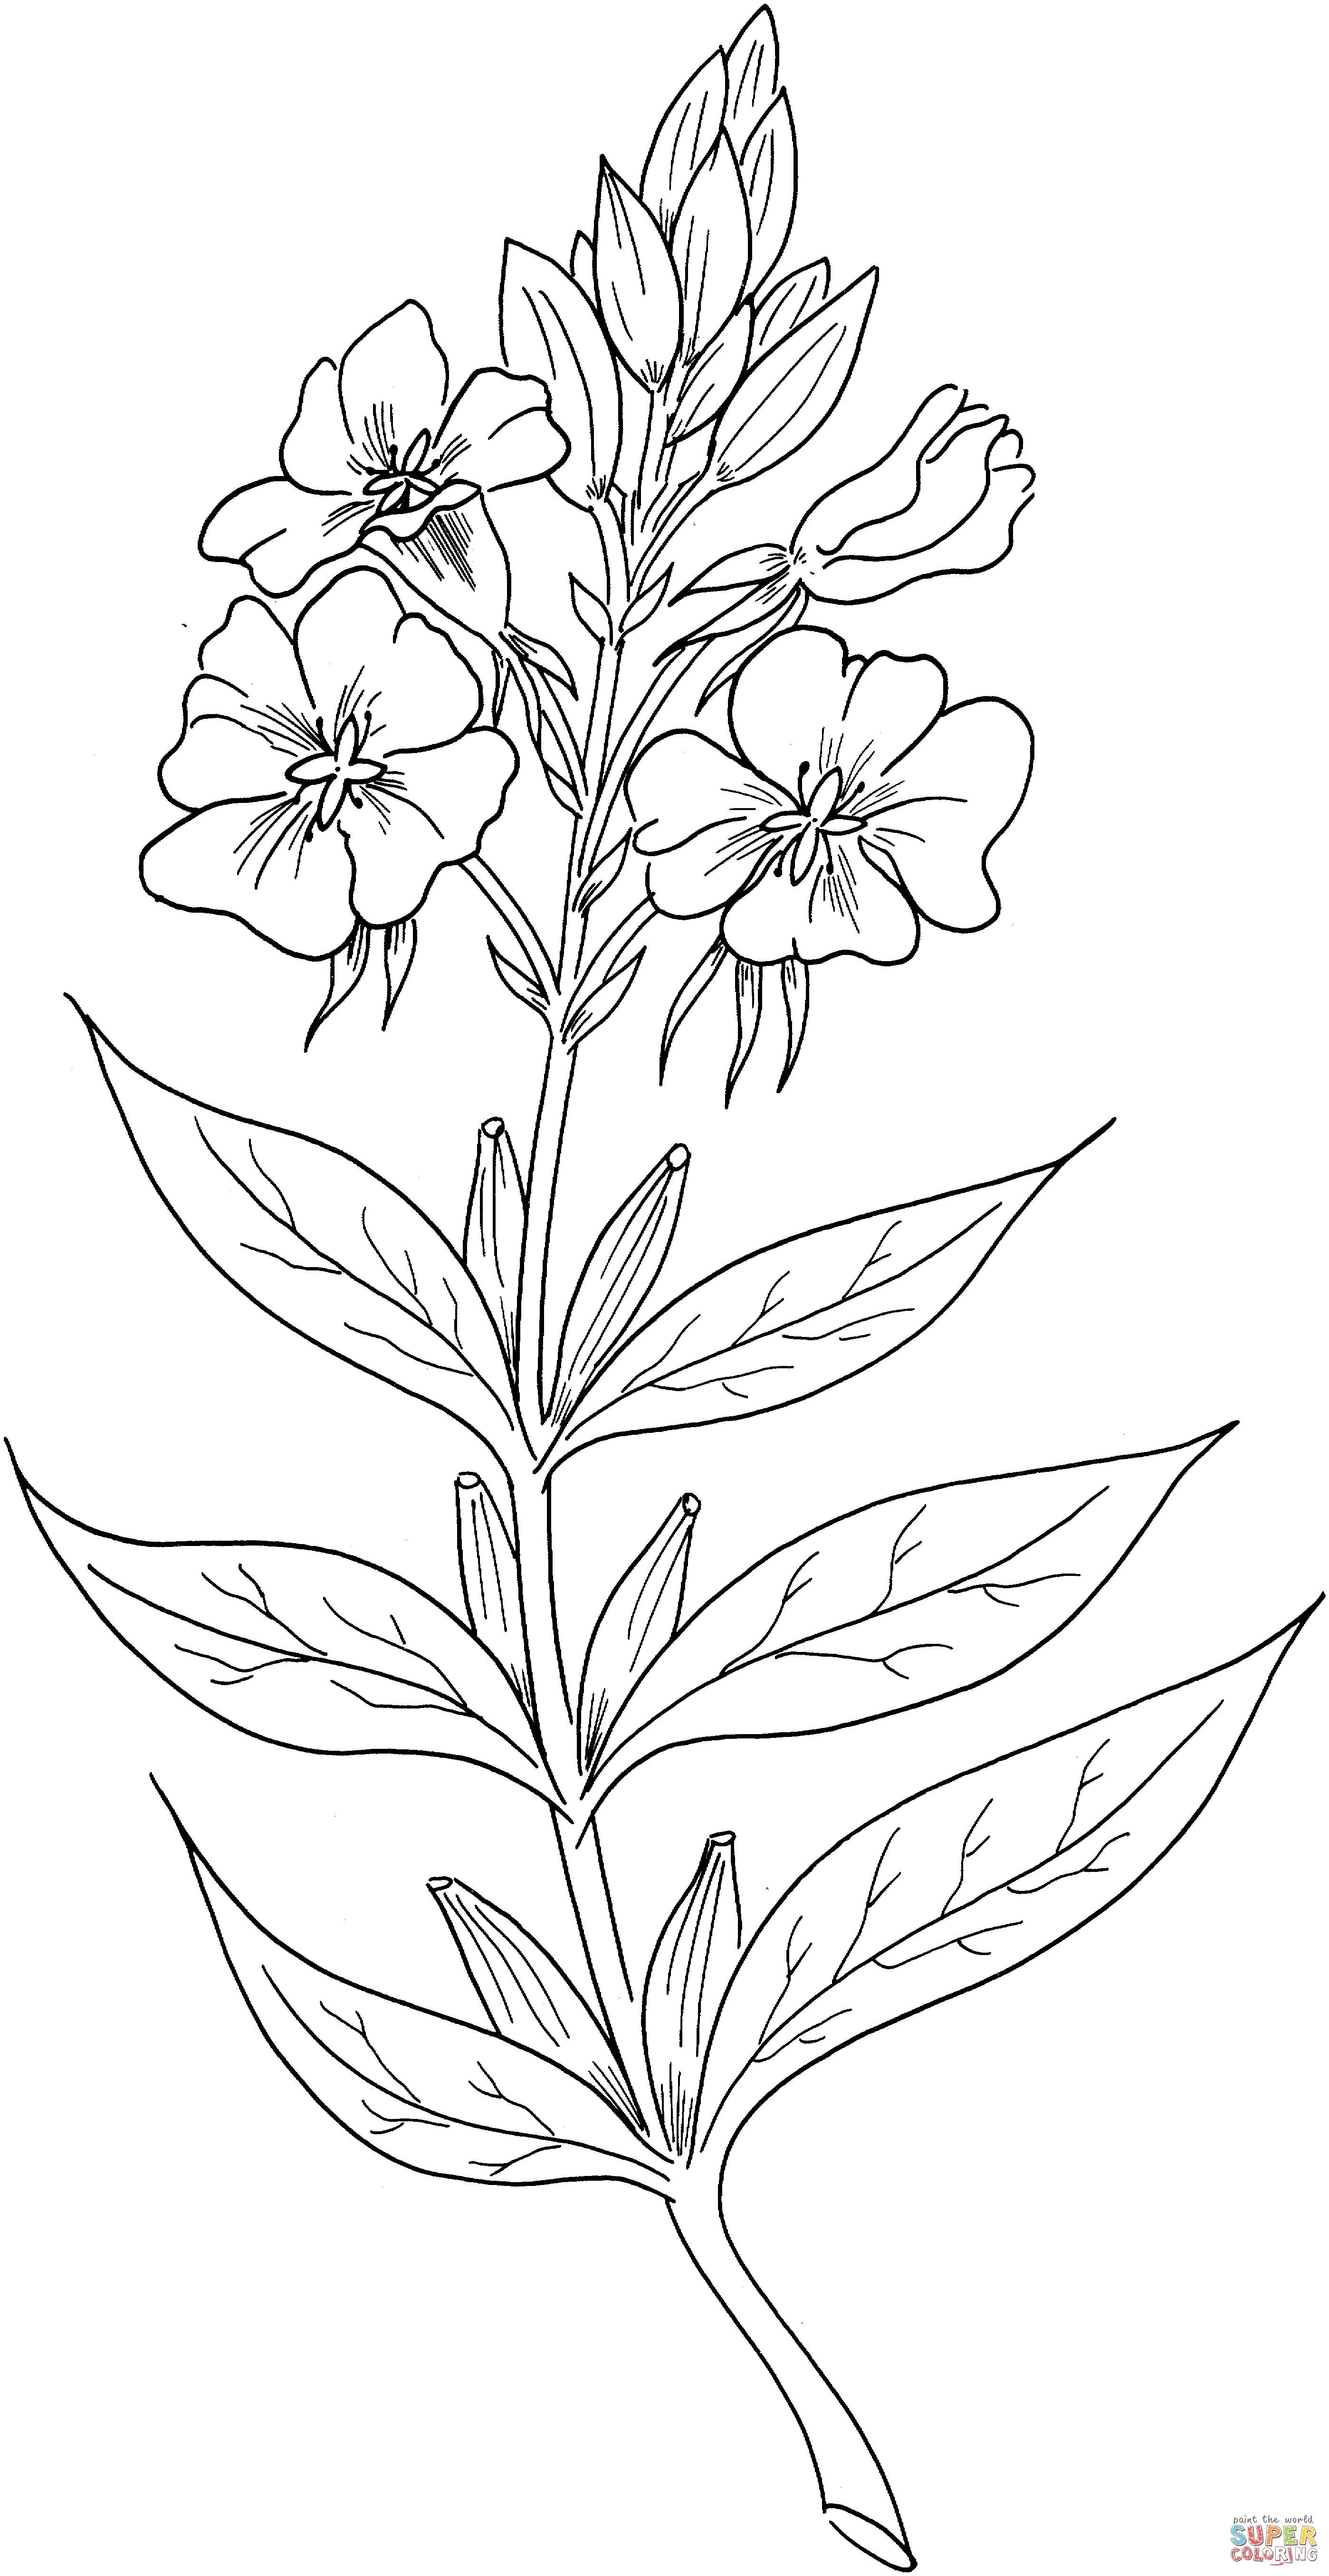 Enothera Biennis Or Evening Primrose Or Evening Star Coloring Pages